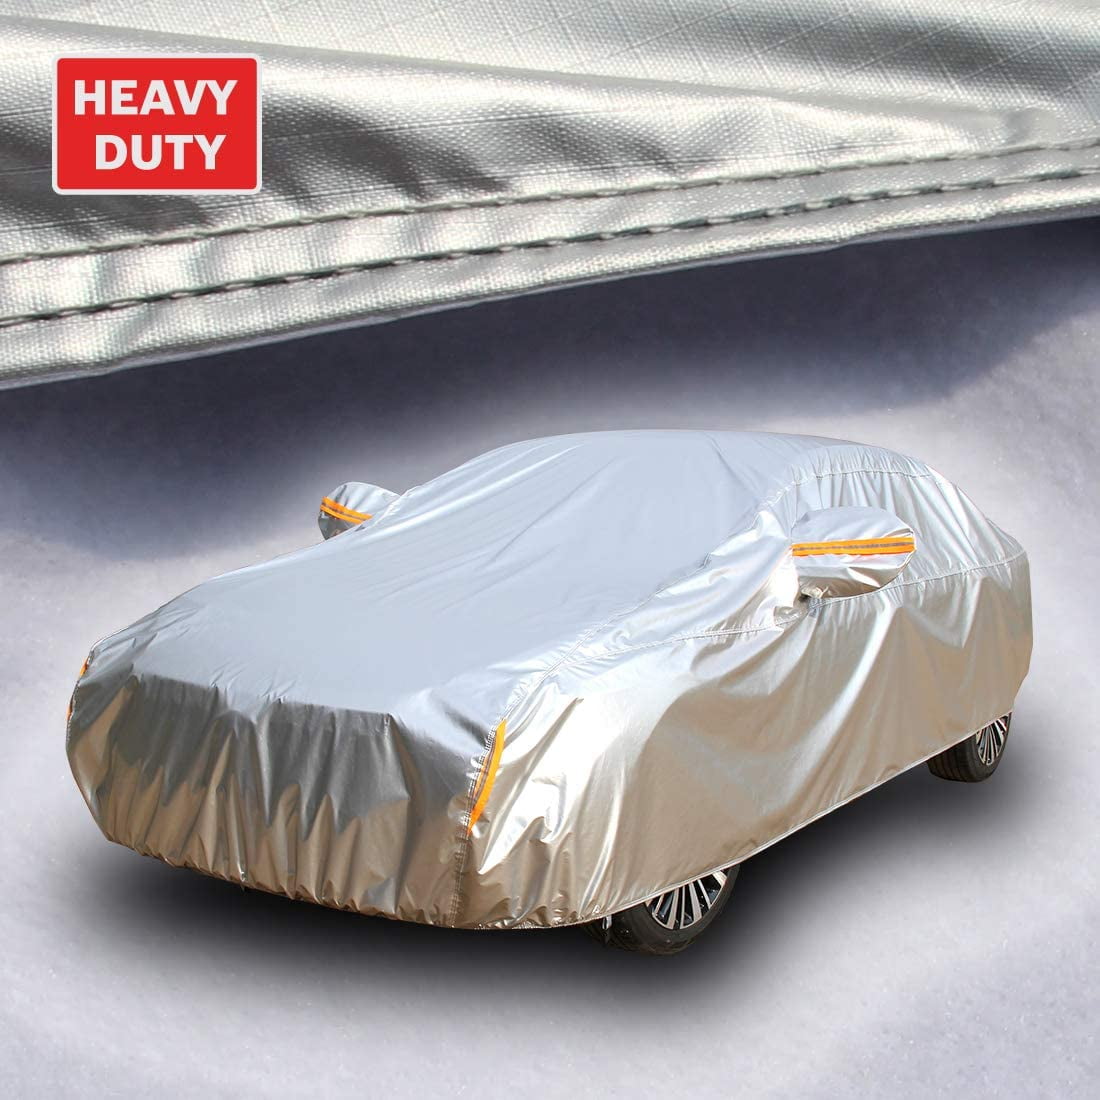 Tecoom Hard Shell Breathable Material Door Shape Zipper Design Waterproof UV-Proof Windproof Car Cover for All Weather Indoor Outdoor Fit 191-200 inches Sedan 